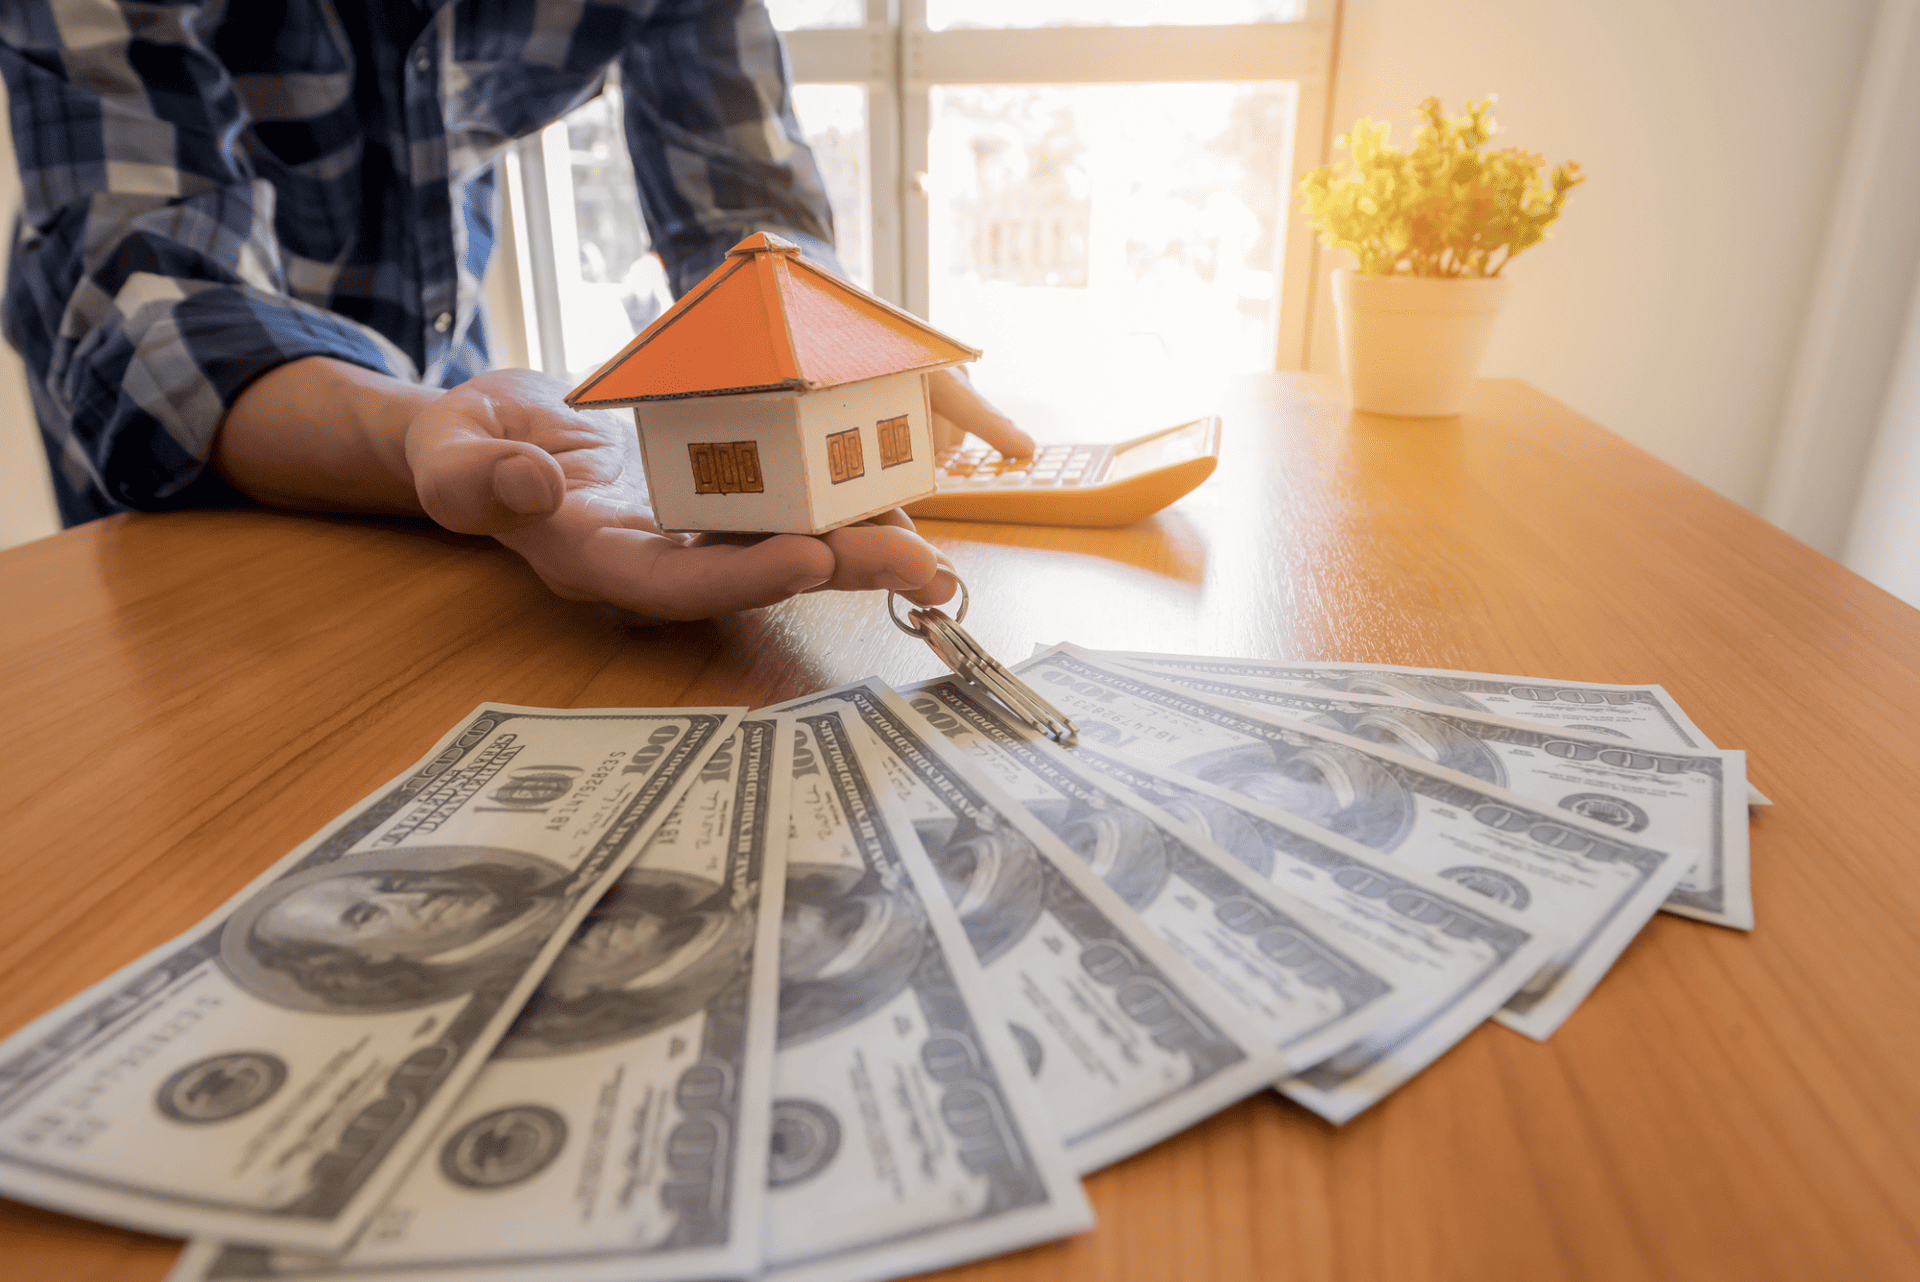 Do You Want Immediate Cash For Your Property In Tampa?